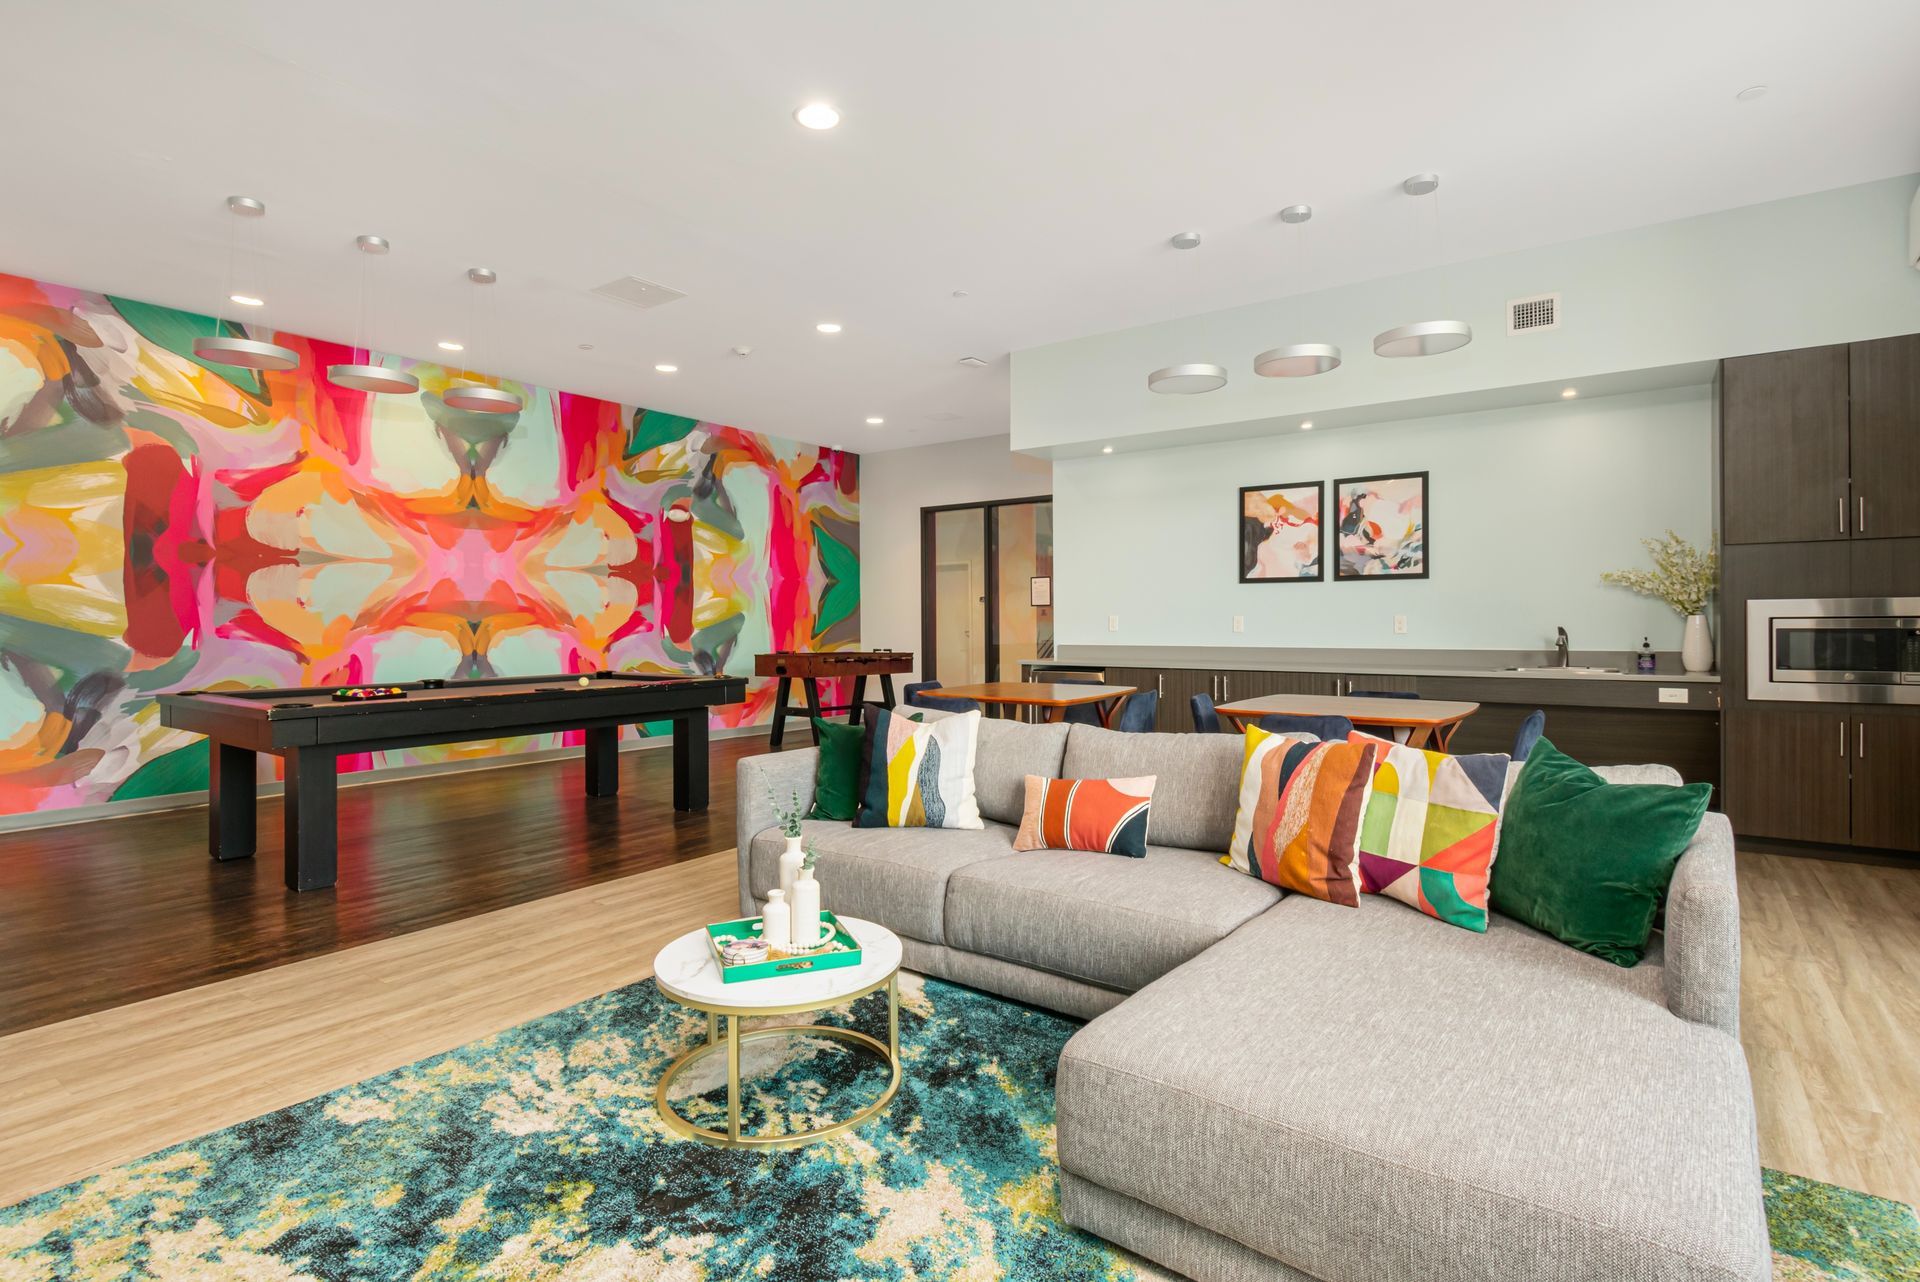 Clubhouse with entertainment and colorful wall design at Link 480.